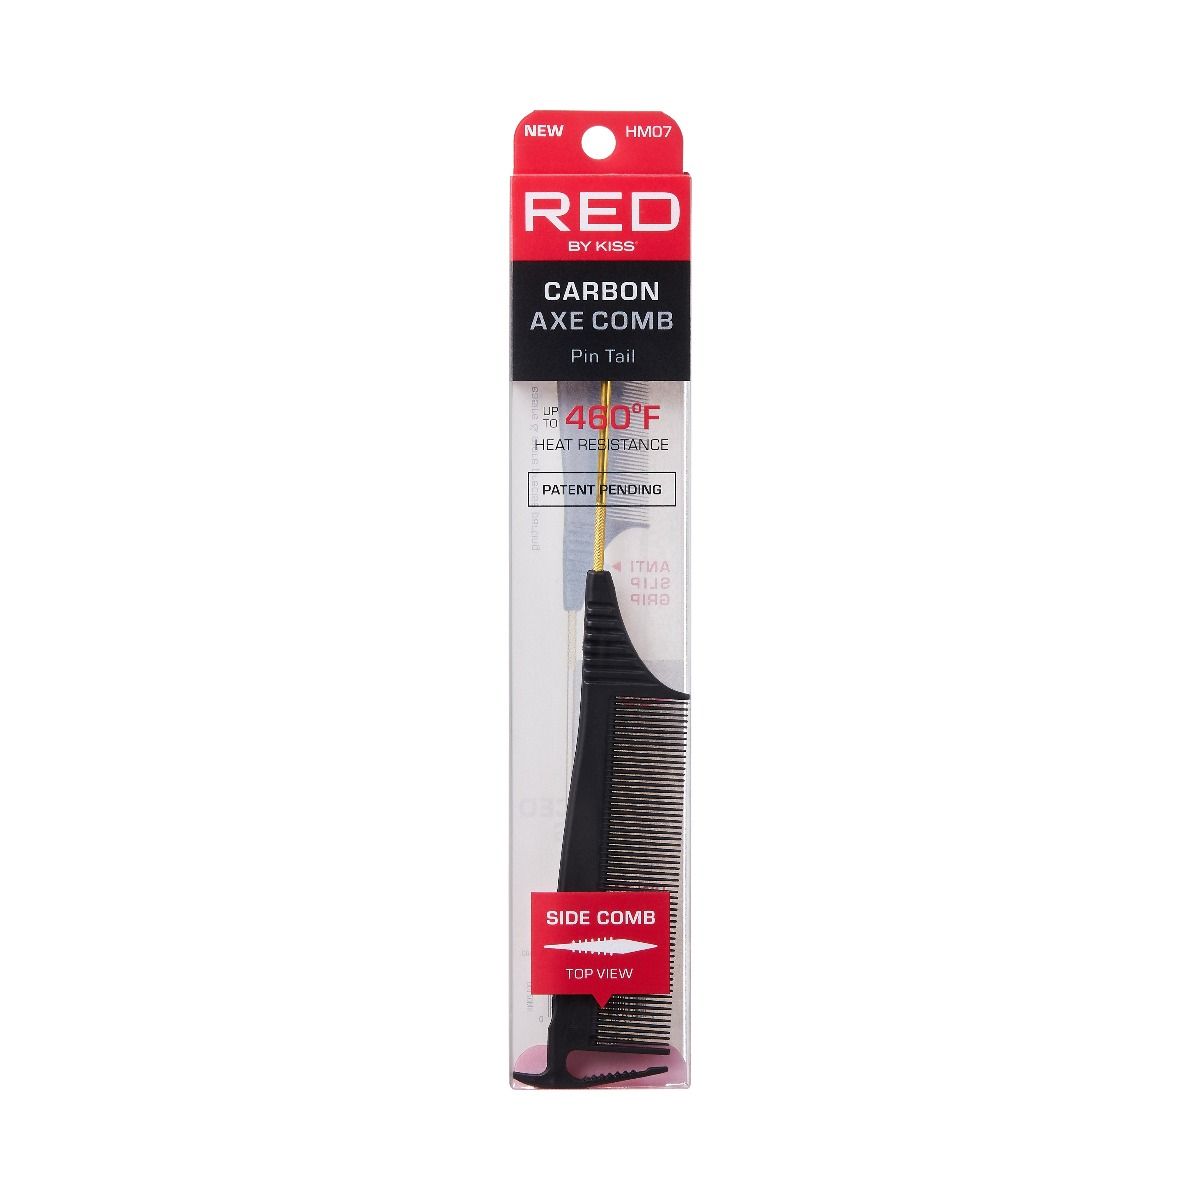 Red by Kiss Carbon Axe Pin Tail Comb #HM07